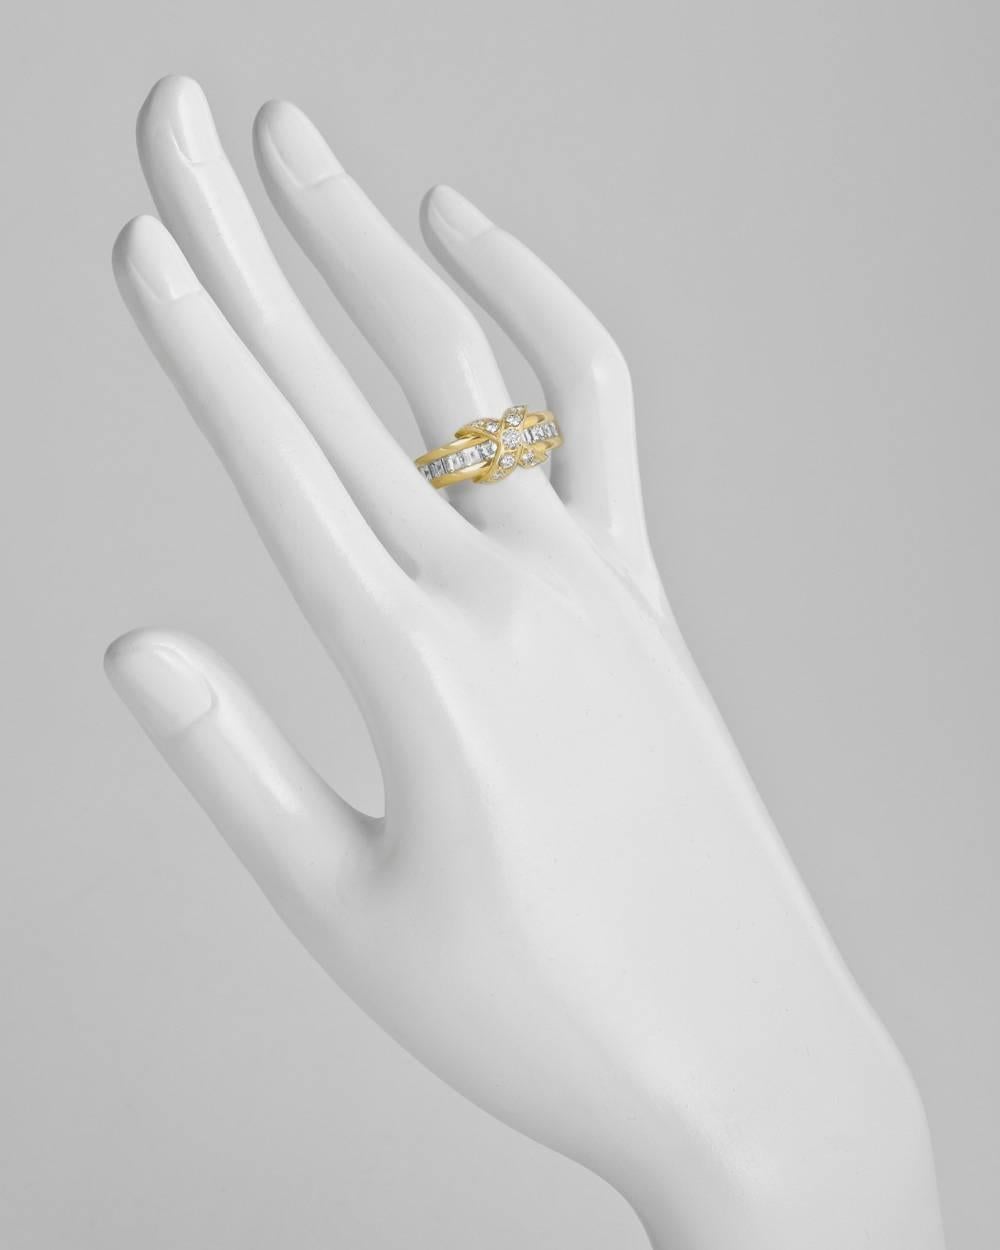 Band ring, centering a round-cut diamond-set 'X' motif, flanked by a row of channel-set square-cut diamonds, in 18k yellow gold, signed Tiffany & Co. Accompanied by Tiffany ring box. Size 5.75.
